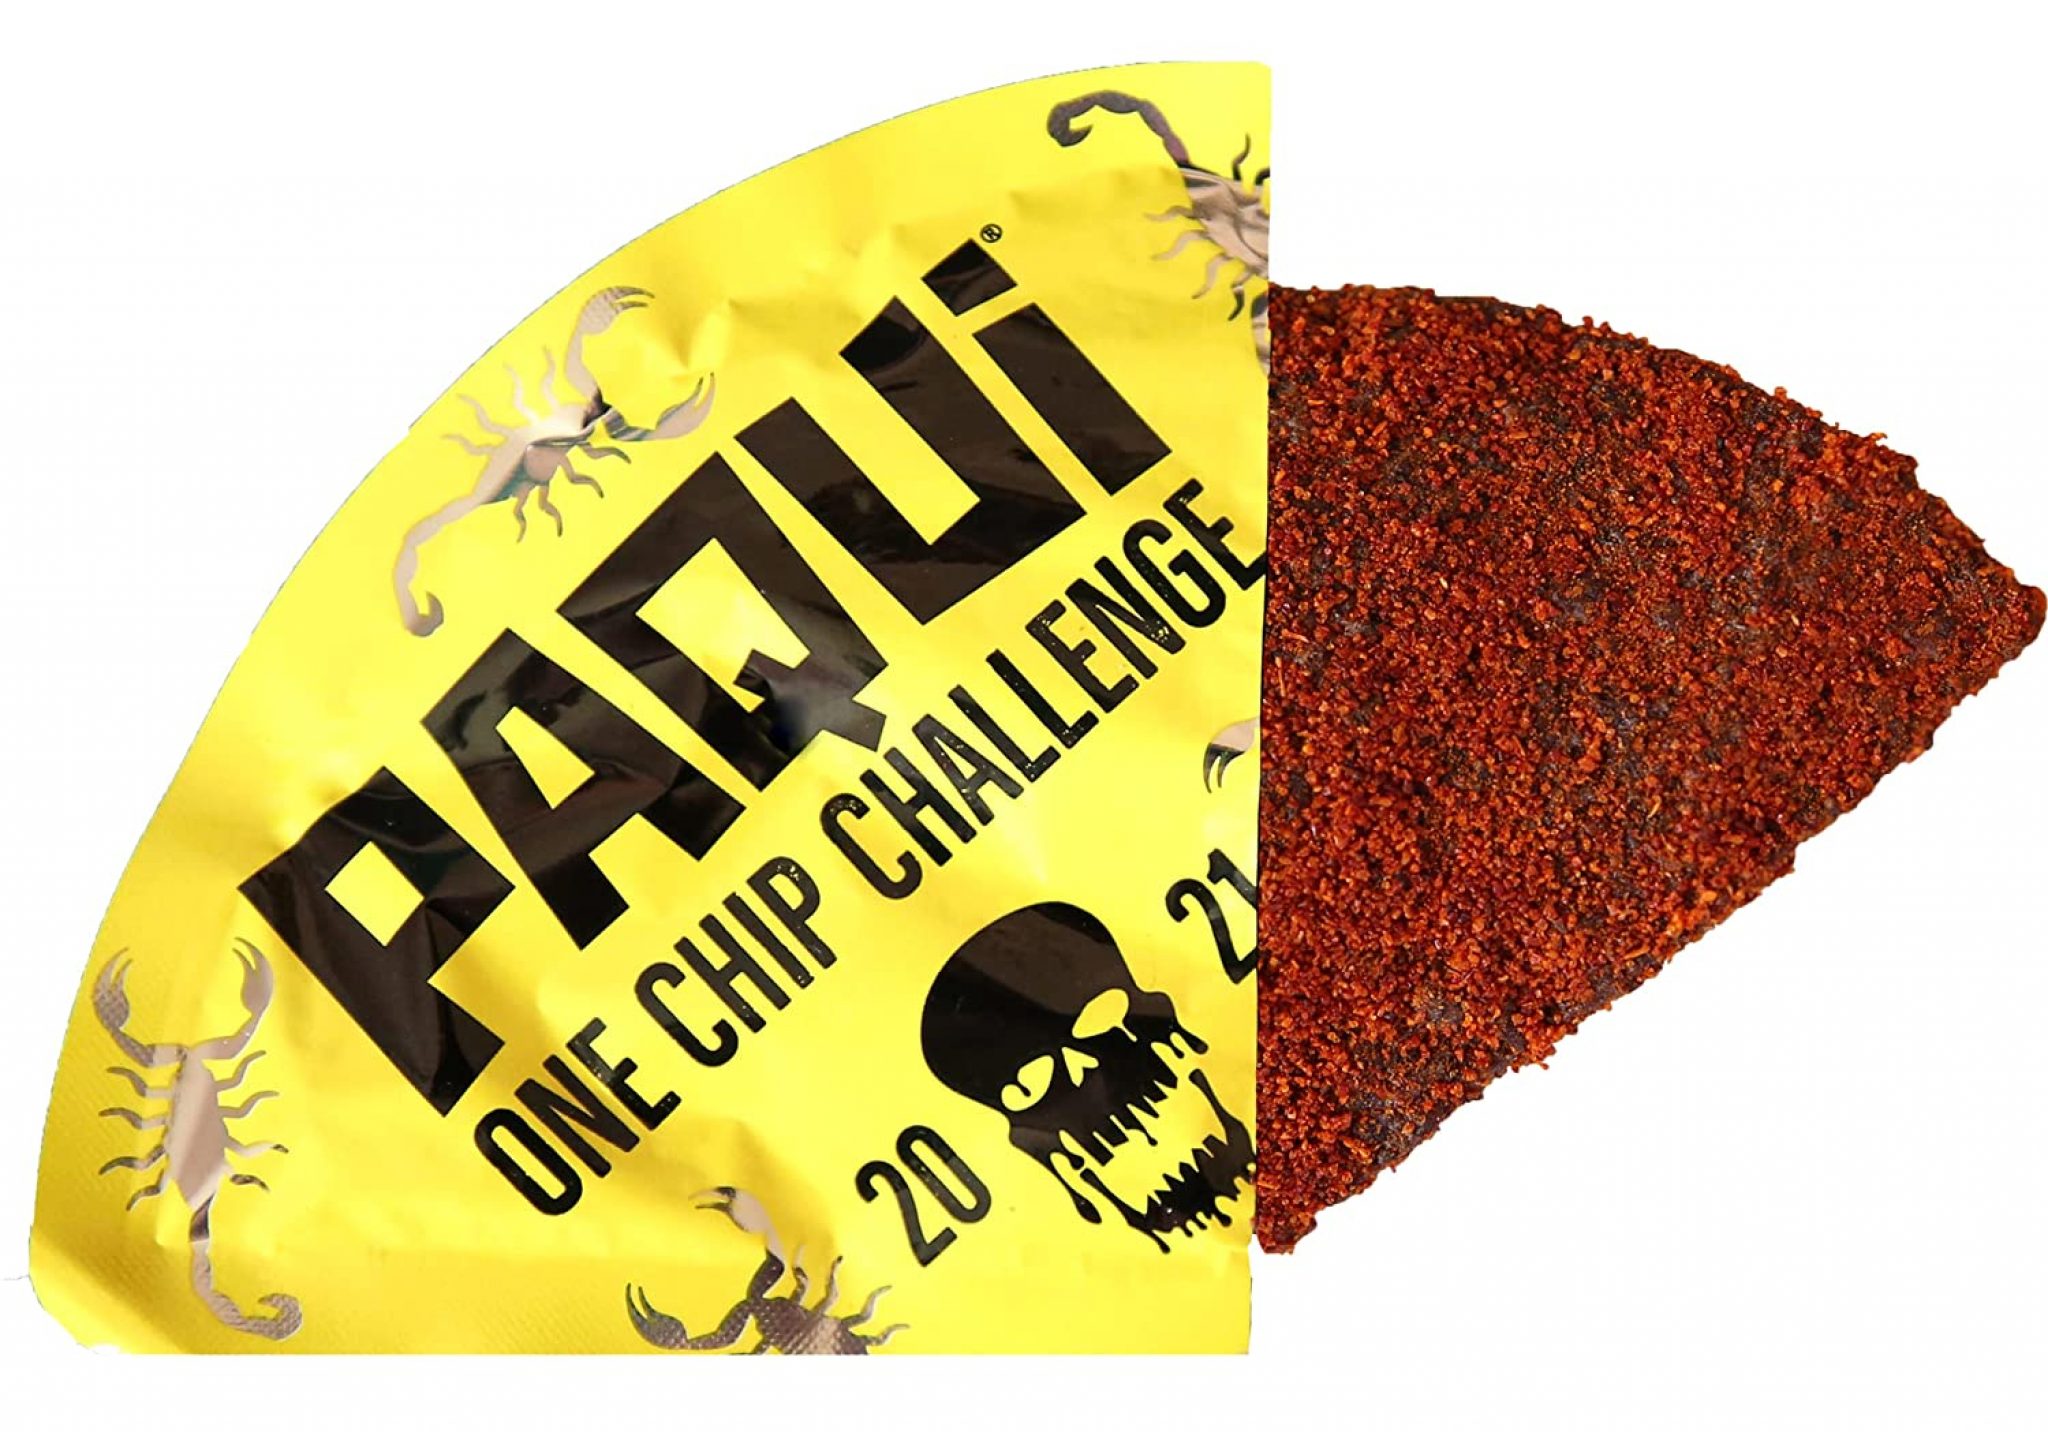 paqui ghost pepper vs one chip